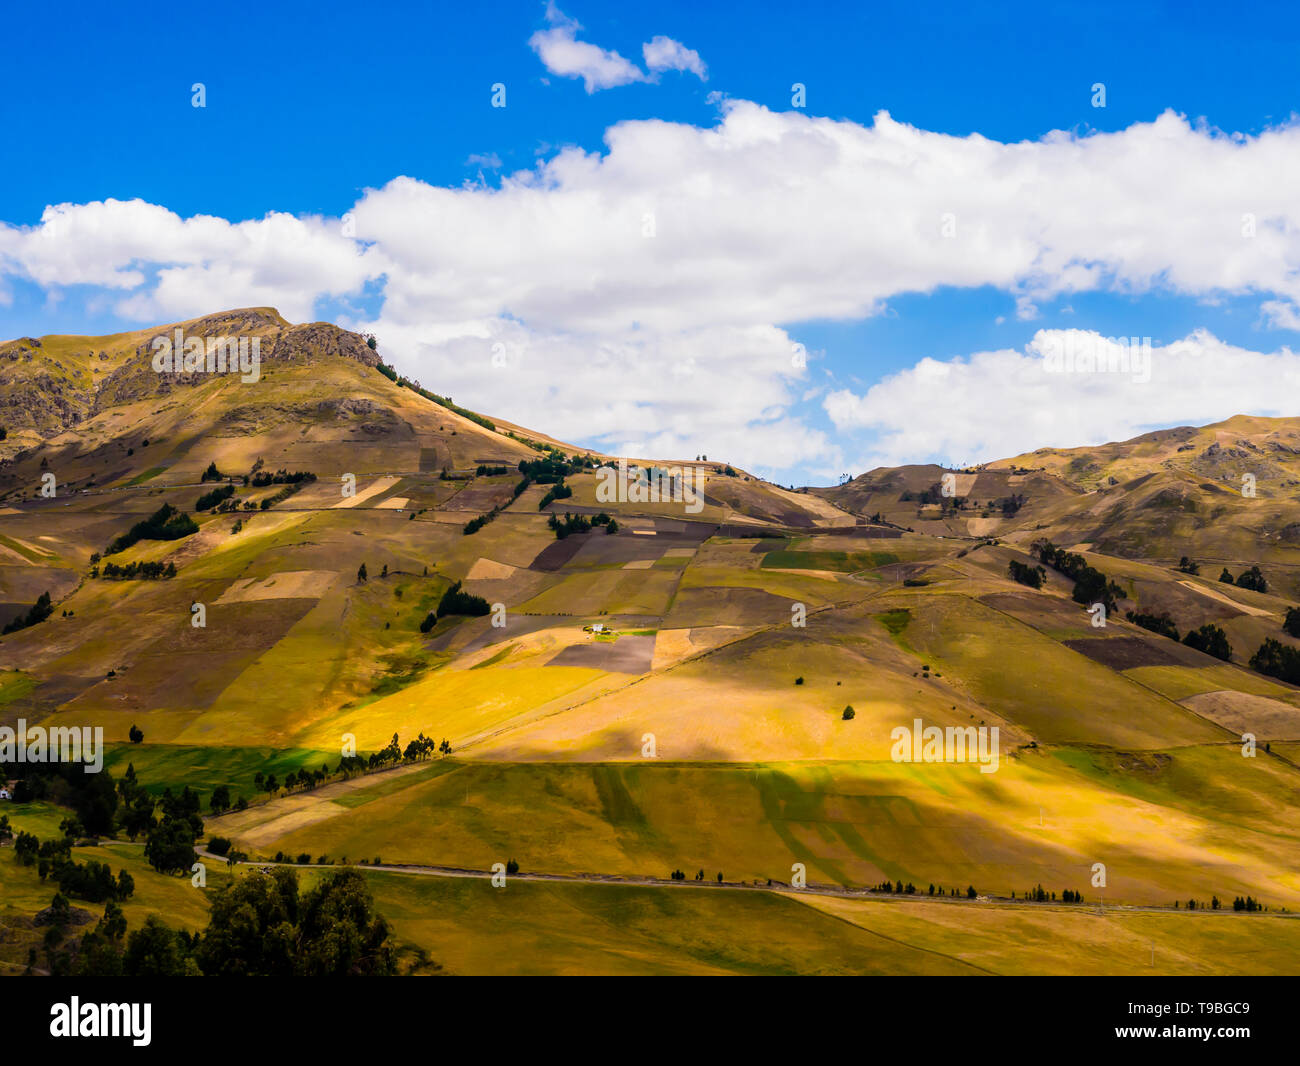 Ecuador, beautiful andean landscape between Zumbahua canyon and Quilotoa lagoon with cultivated fields Stock Photo